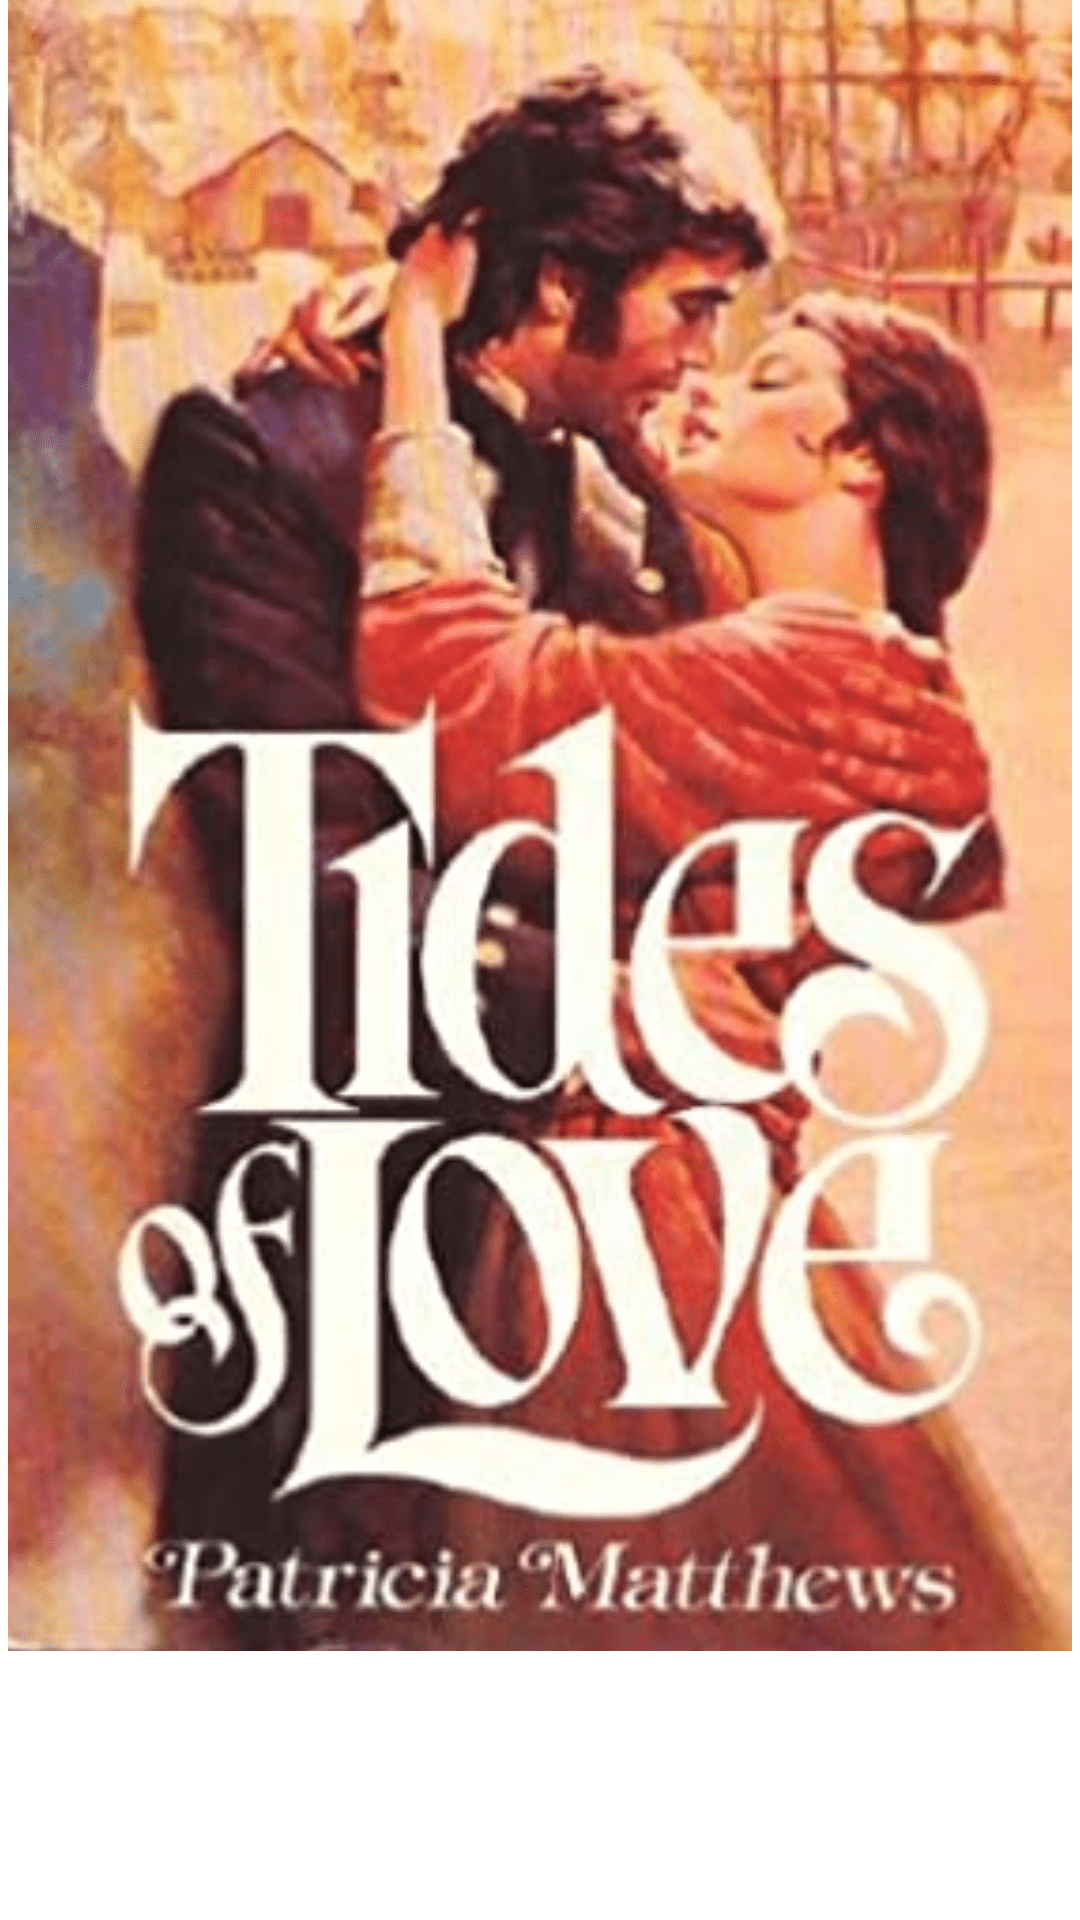 Tides of Love by Patricia Matthews